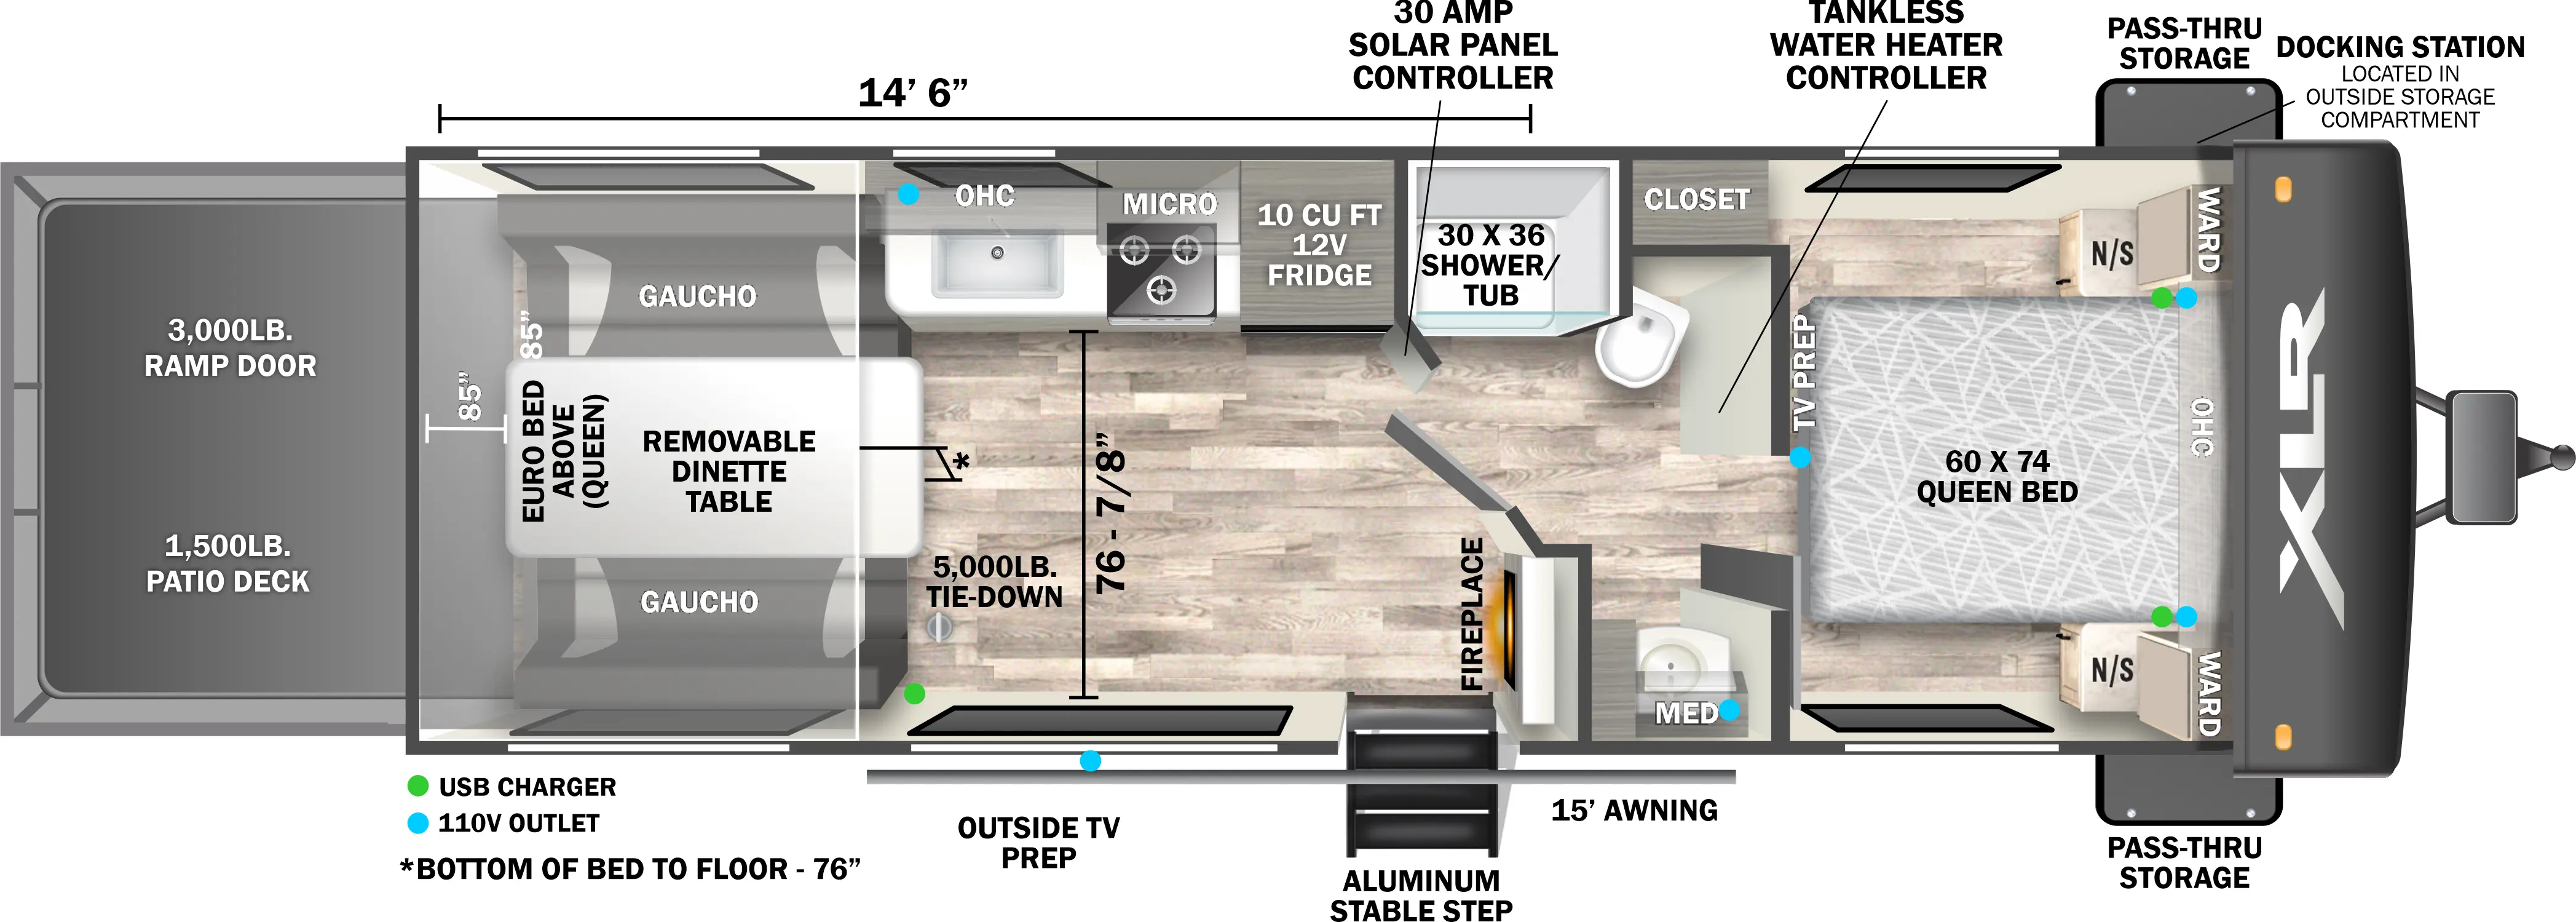 The 2514M has zero slideouts, one entry, and a rear ramp door. Exterior features pass-through storage with docking station, 15 foot awning, aluminum stable step entry, and outside TV prep. Interior layout front to back: foot-facing queen bed with overhead cabinet and wardrobes with night stands on each side, door side closet, and TV prep along inner wall at the foot of the bed; full split pass through bathroom with medicine cabinet, and tankless water heater controller; off-door side 12 volt refrigerator, 30 amp solar panel controller, microwave, cooktop, overhead cabinet, and sink; door side fireplace and entry; rear opposable gauchos with removable dinette table, and euro queen bed system above. Garage dimensions: 85 inch rear ramp door height, 3000 lb ramp door, and 1500 lb patio deck; 76 inches from floor to bottom of euro bed; 14 foot 6 inches from rear to bathroom wall; 76 7/8 inch from door side to kitchen counter.